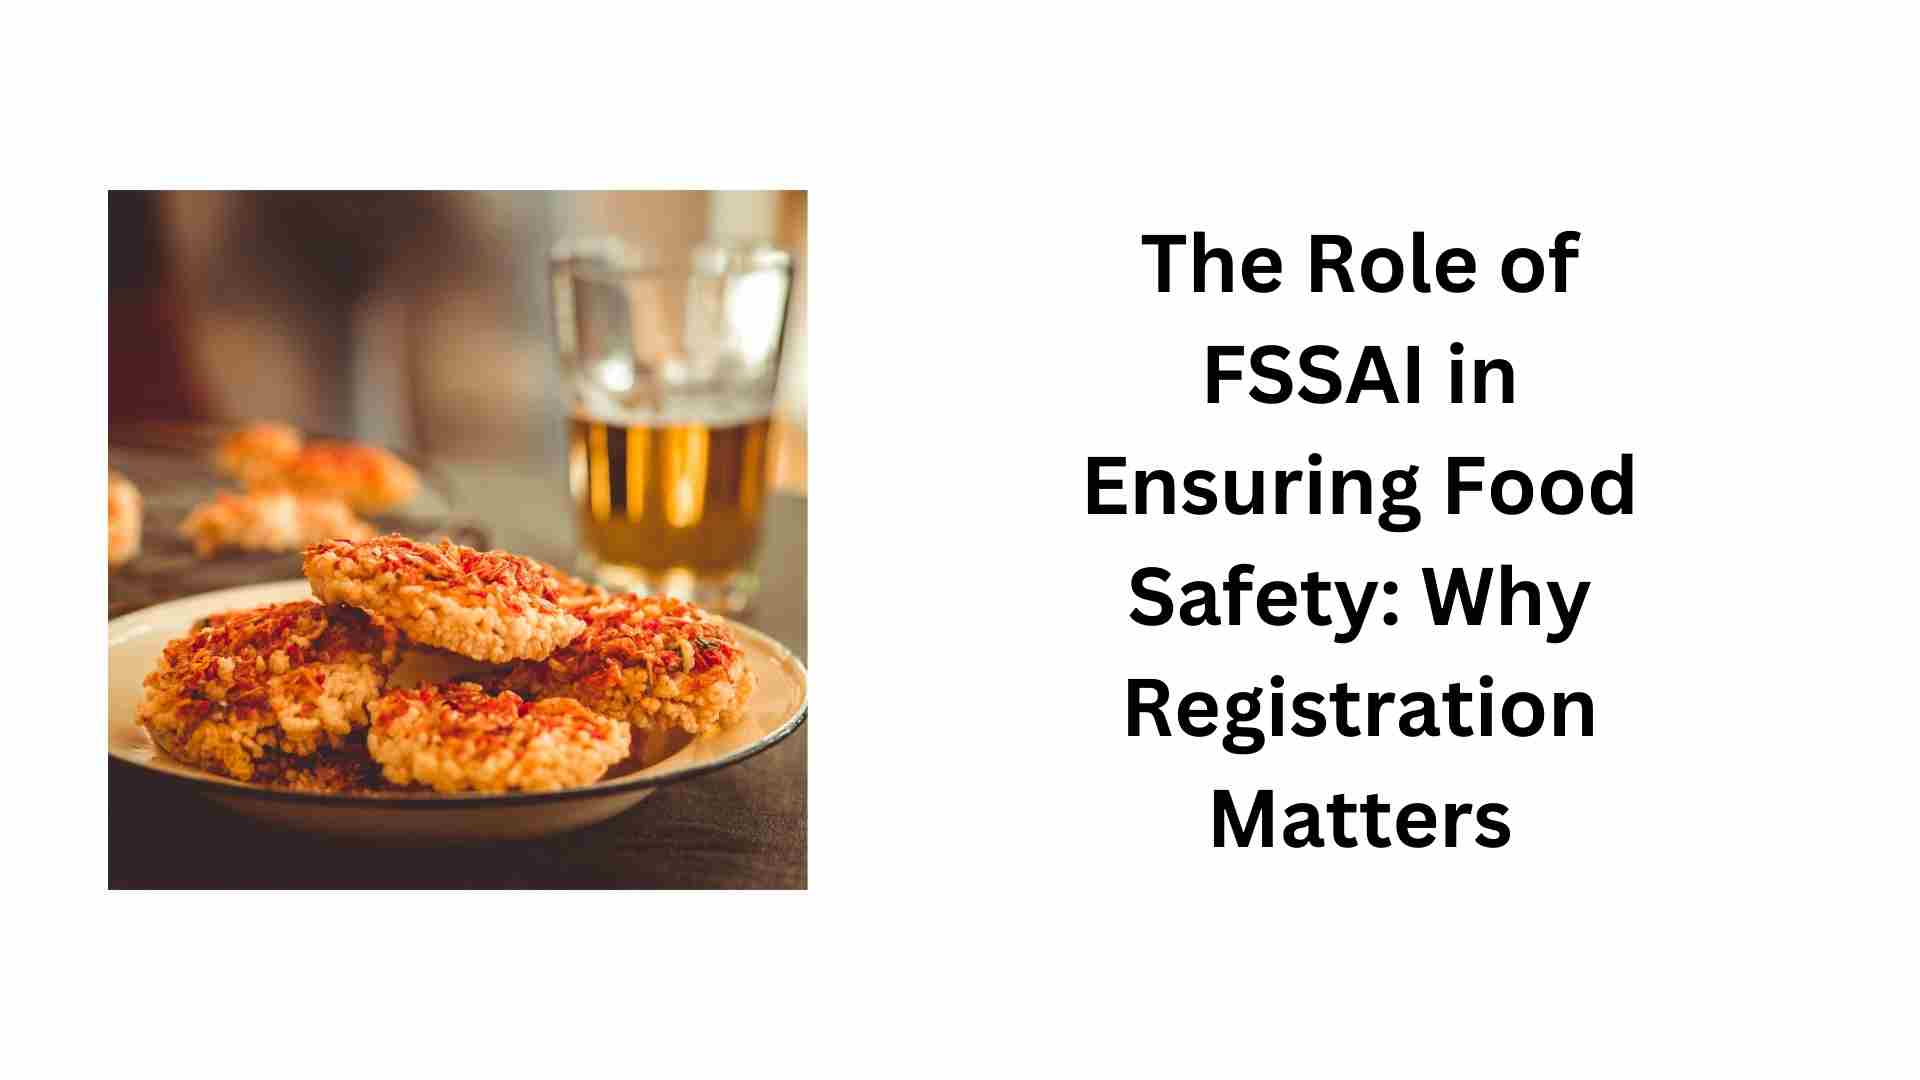 The Role of FSSAI in Ensuring Food Safety: Why Registration Matters